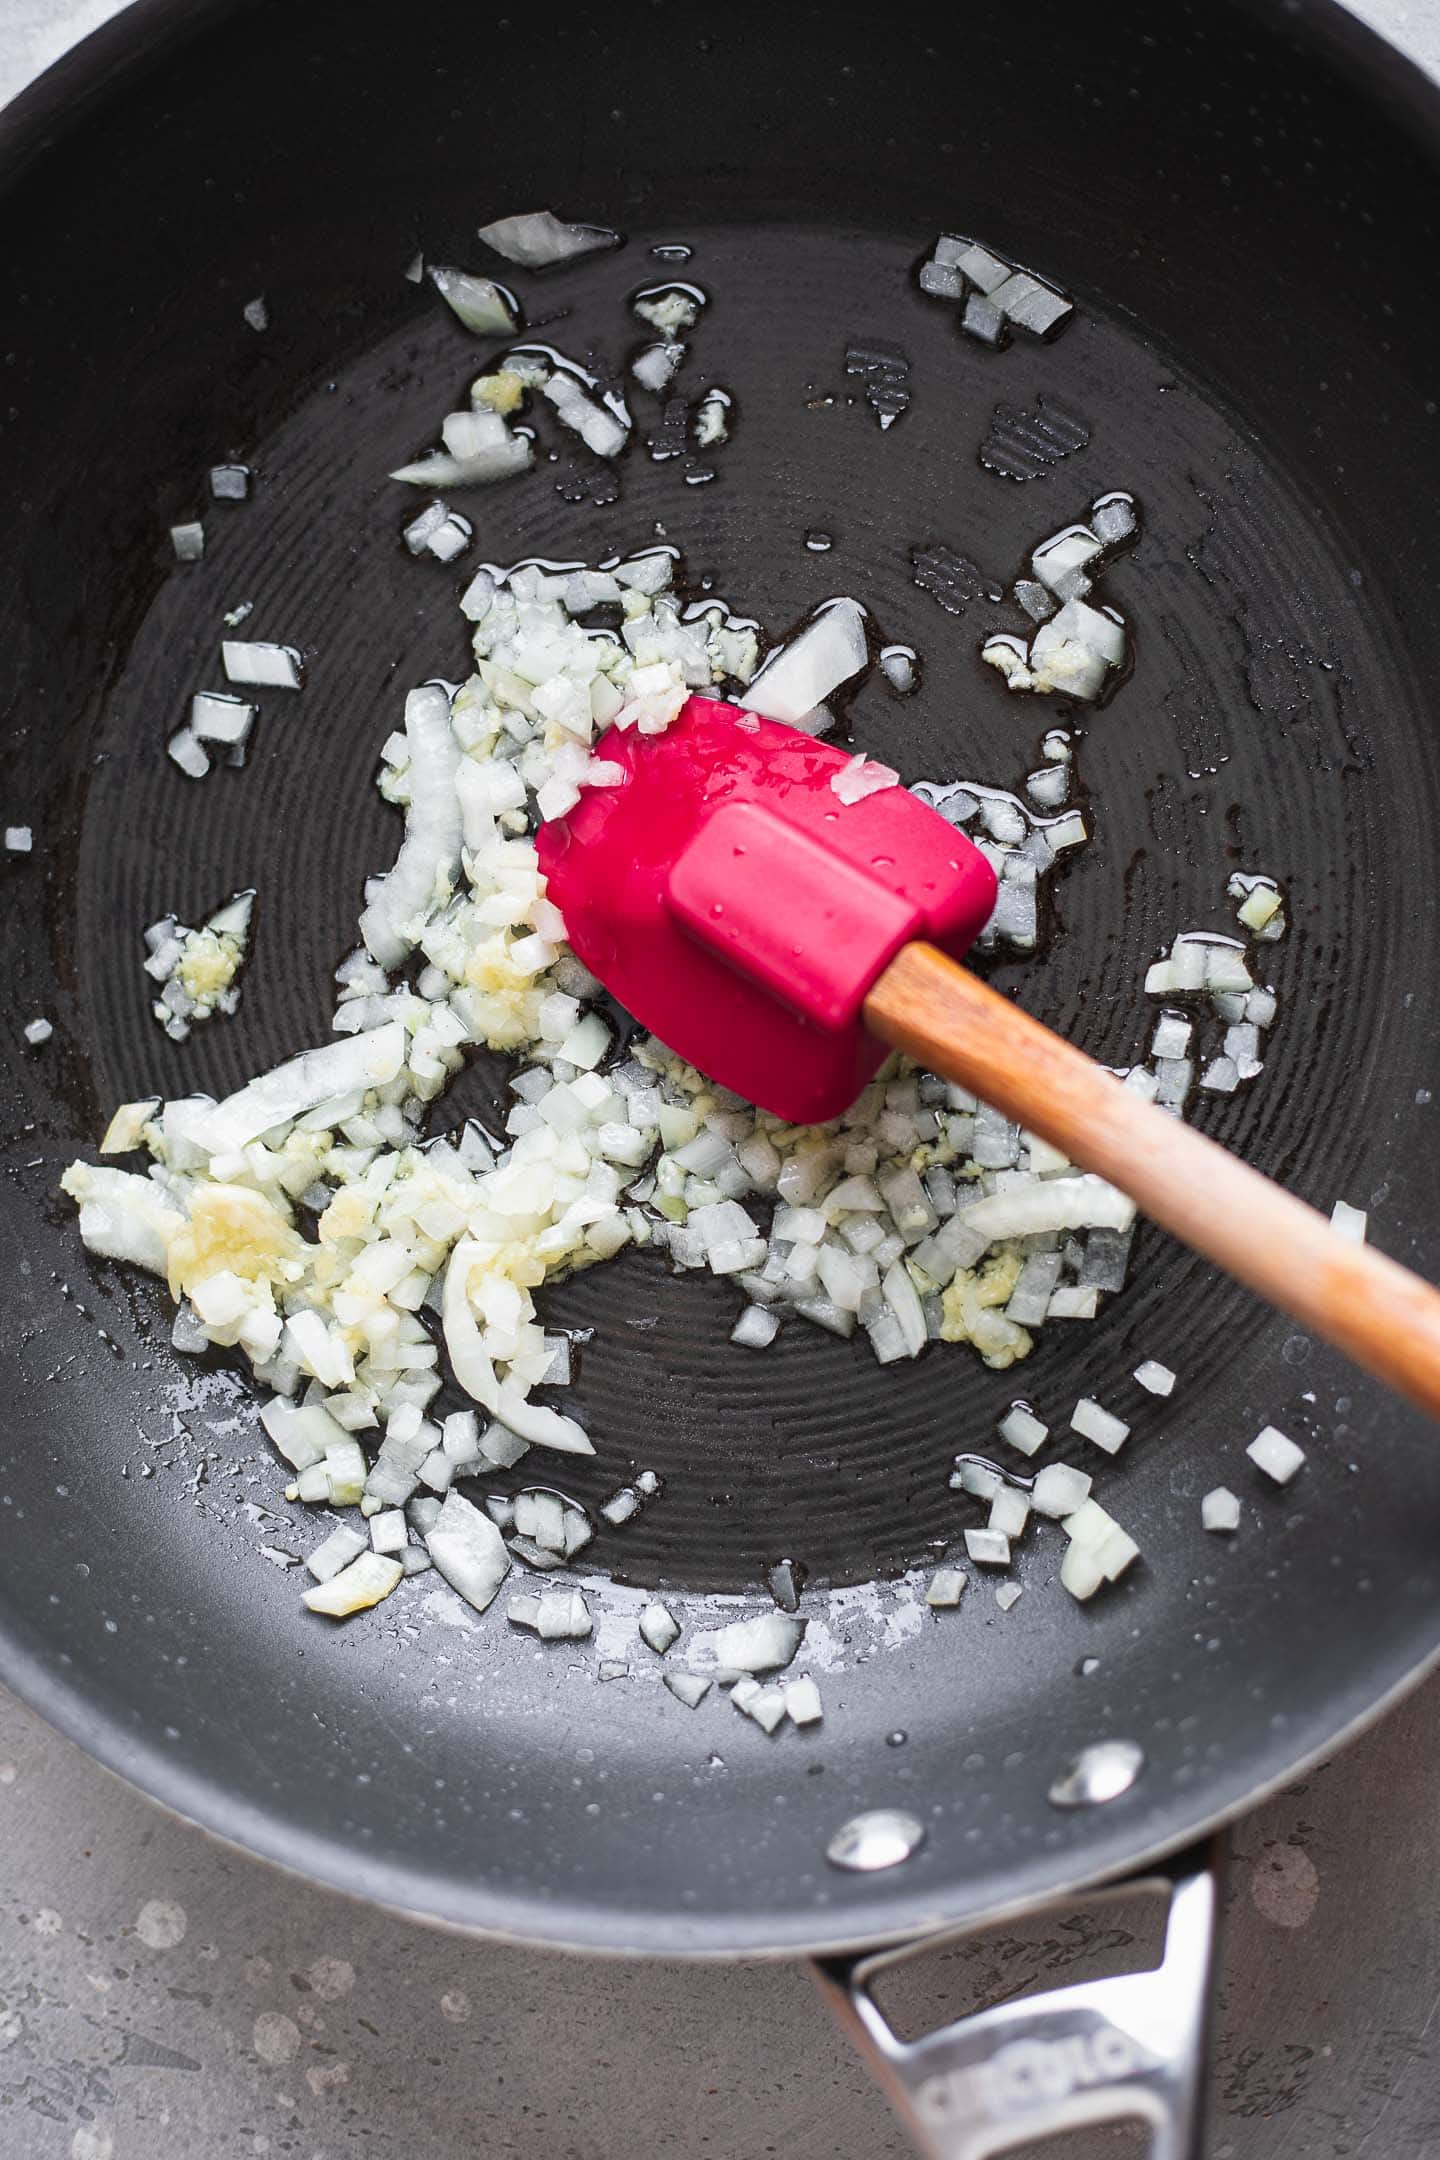 Onions and garlic in a frying pan